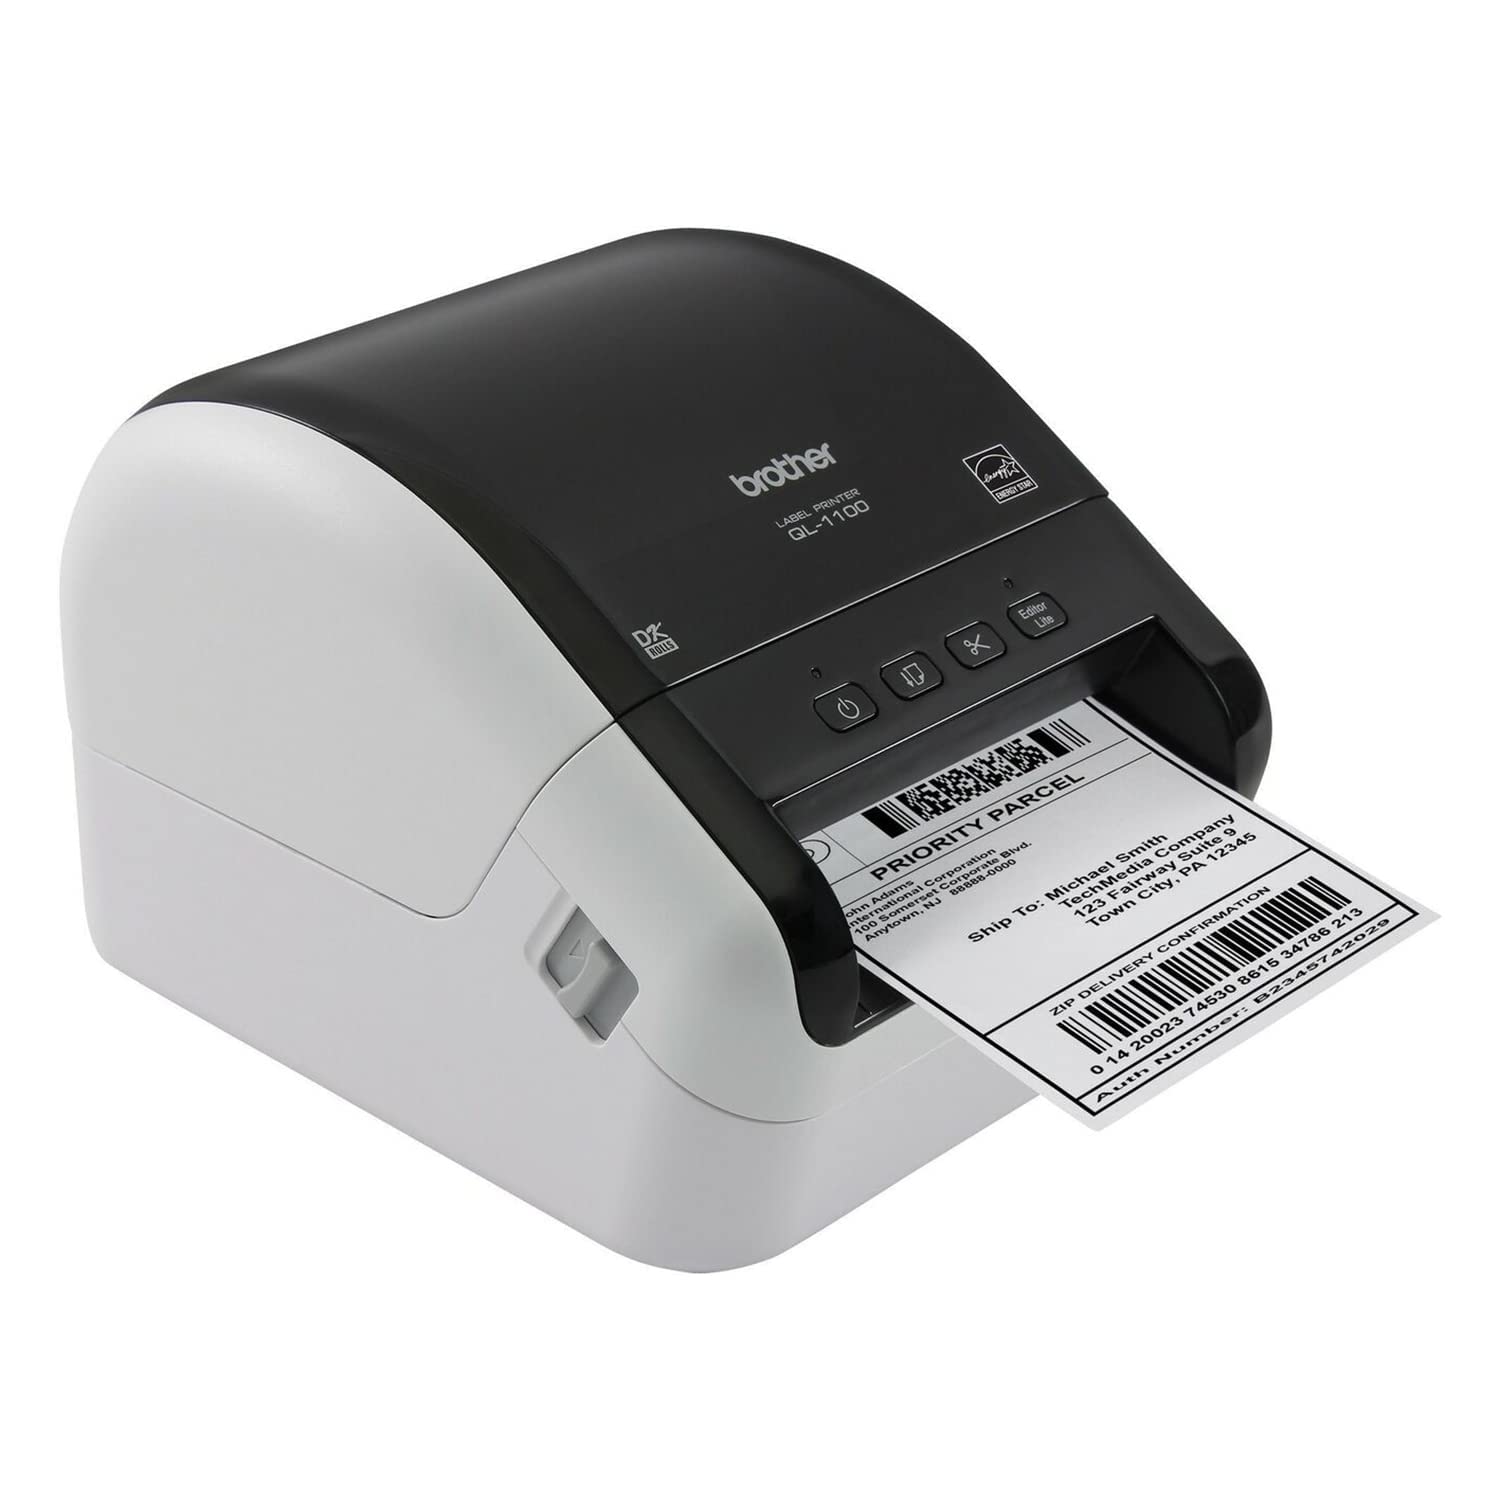 Brother QL-1100 Wide Format Wired Thermal Label Printer, Black - USB Connectivity, 4" Wide, 300 dpi, 69 Labels Per Minute Professional Monochrome Postage Barcode, Includes 1 Roll of 400 Address Labels